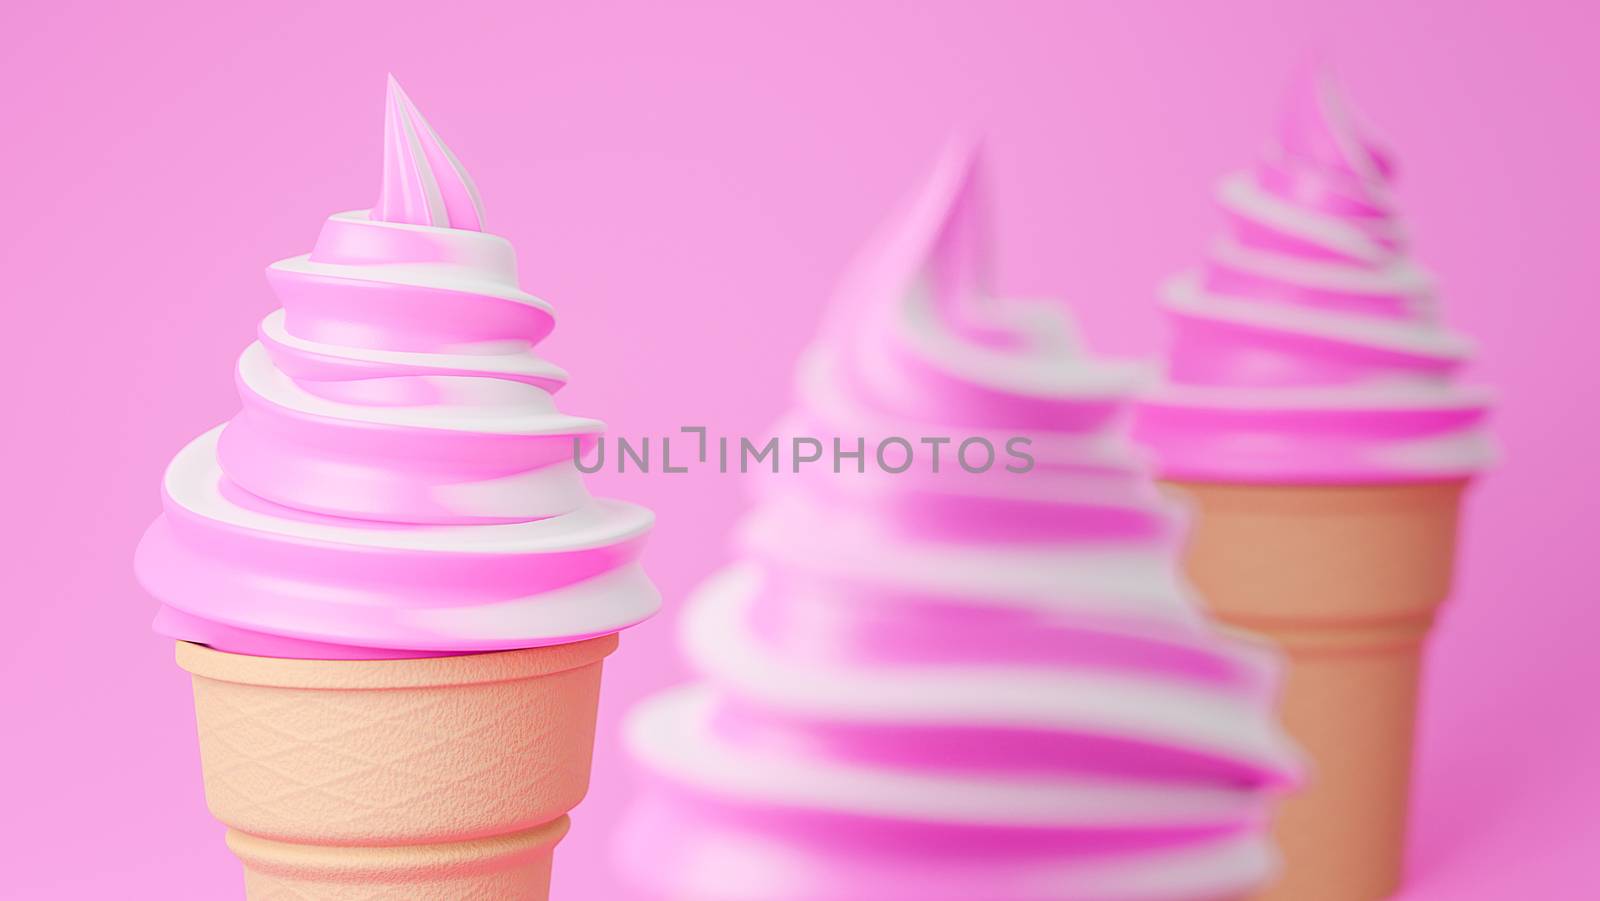 Soft serve ice cream of strawberry and milk flavours on crispy cone on pink background.,3d model and illustration.